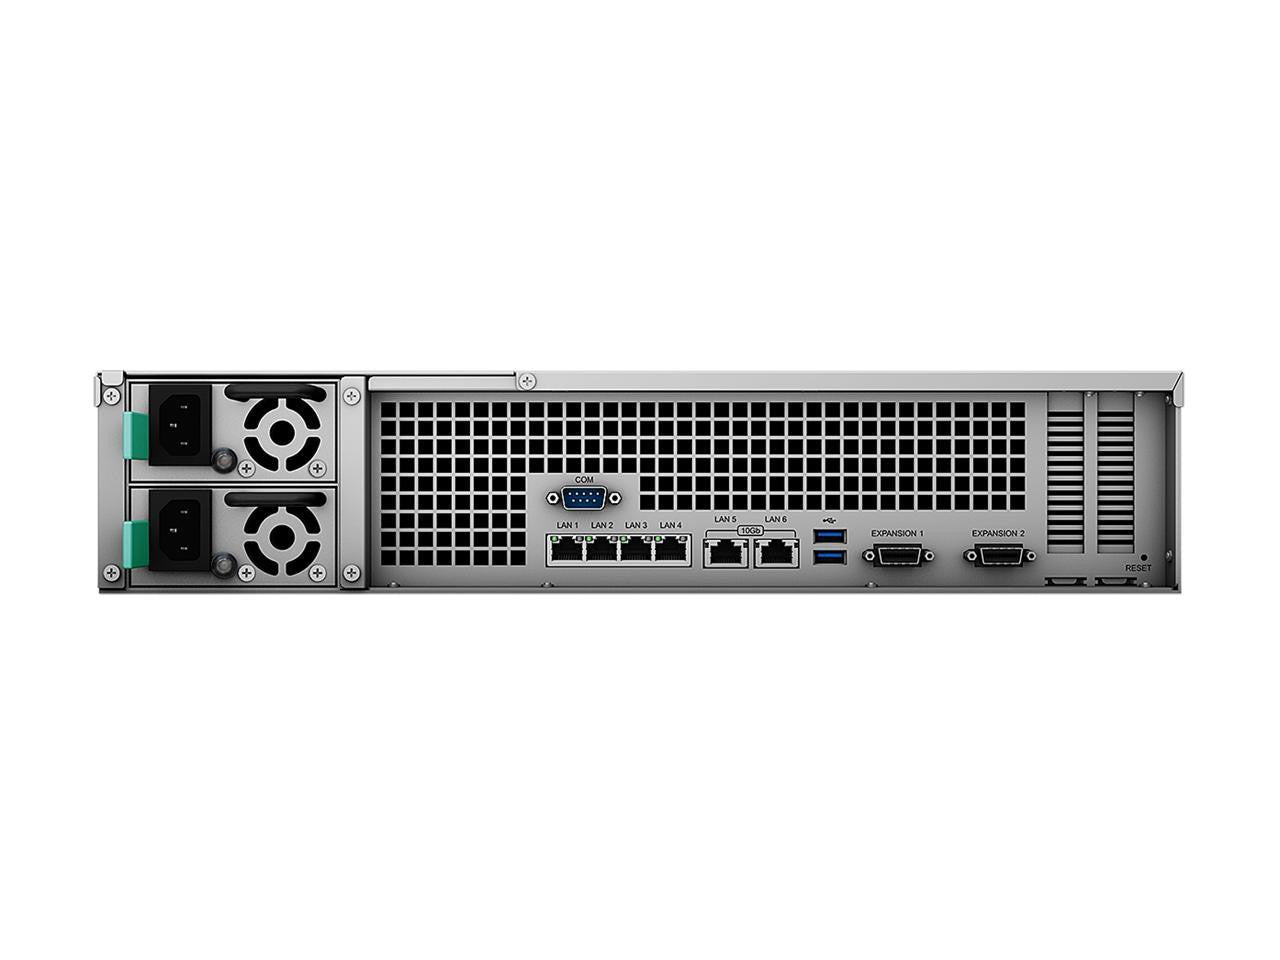 RS3621xs+ 12-BAY RackStation with 16GB RAM and 192TB (12 x 16TB) of Synology Enterprise Drives